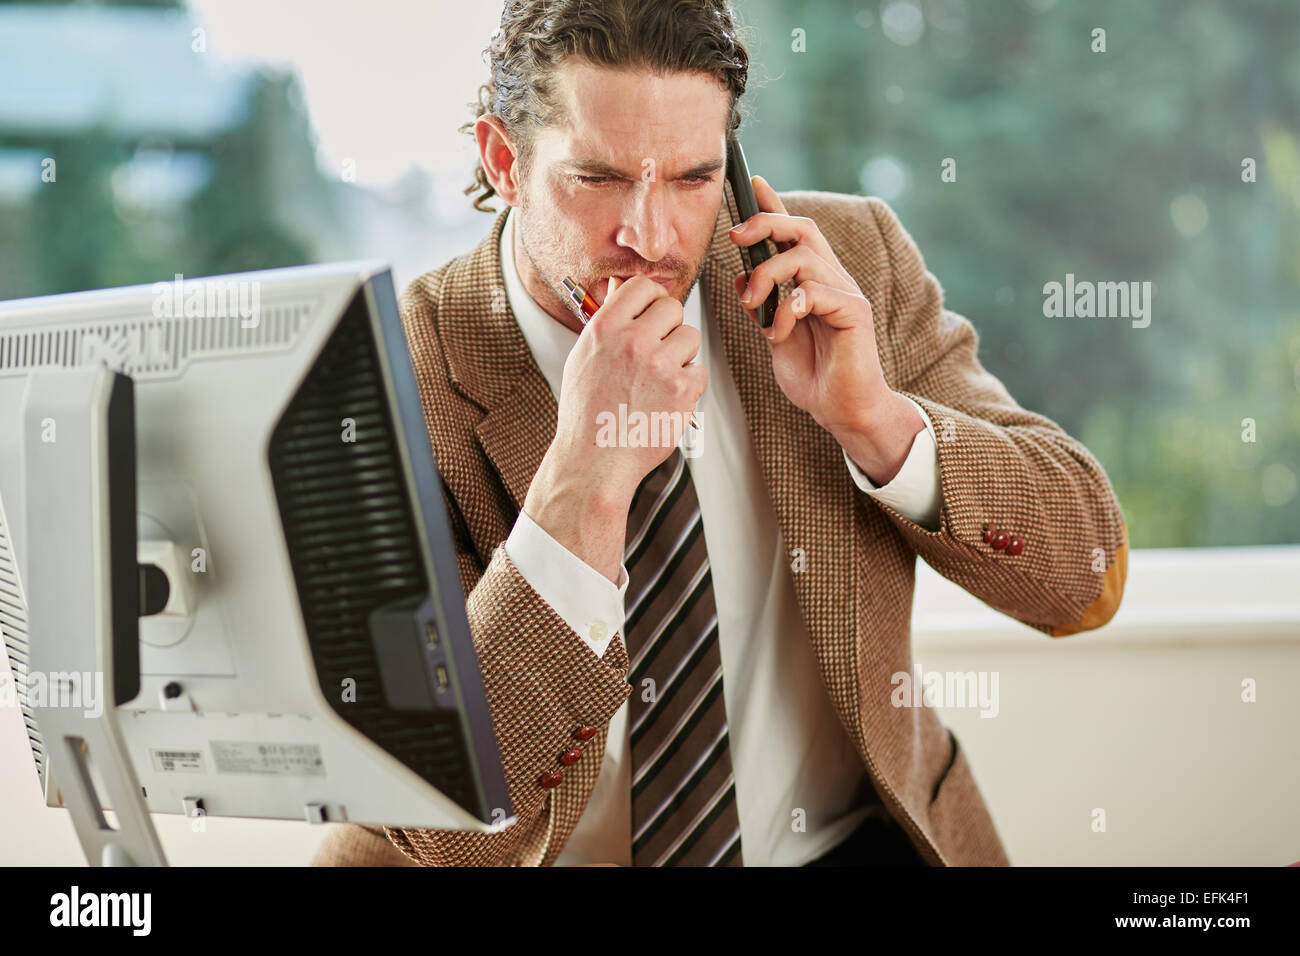 Man working in office Banque D'Images